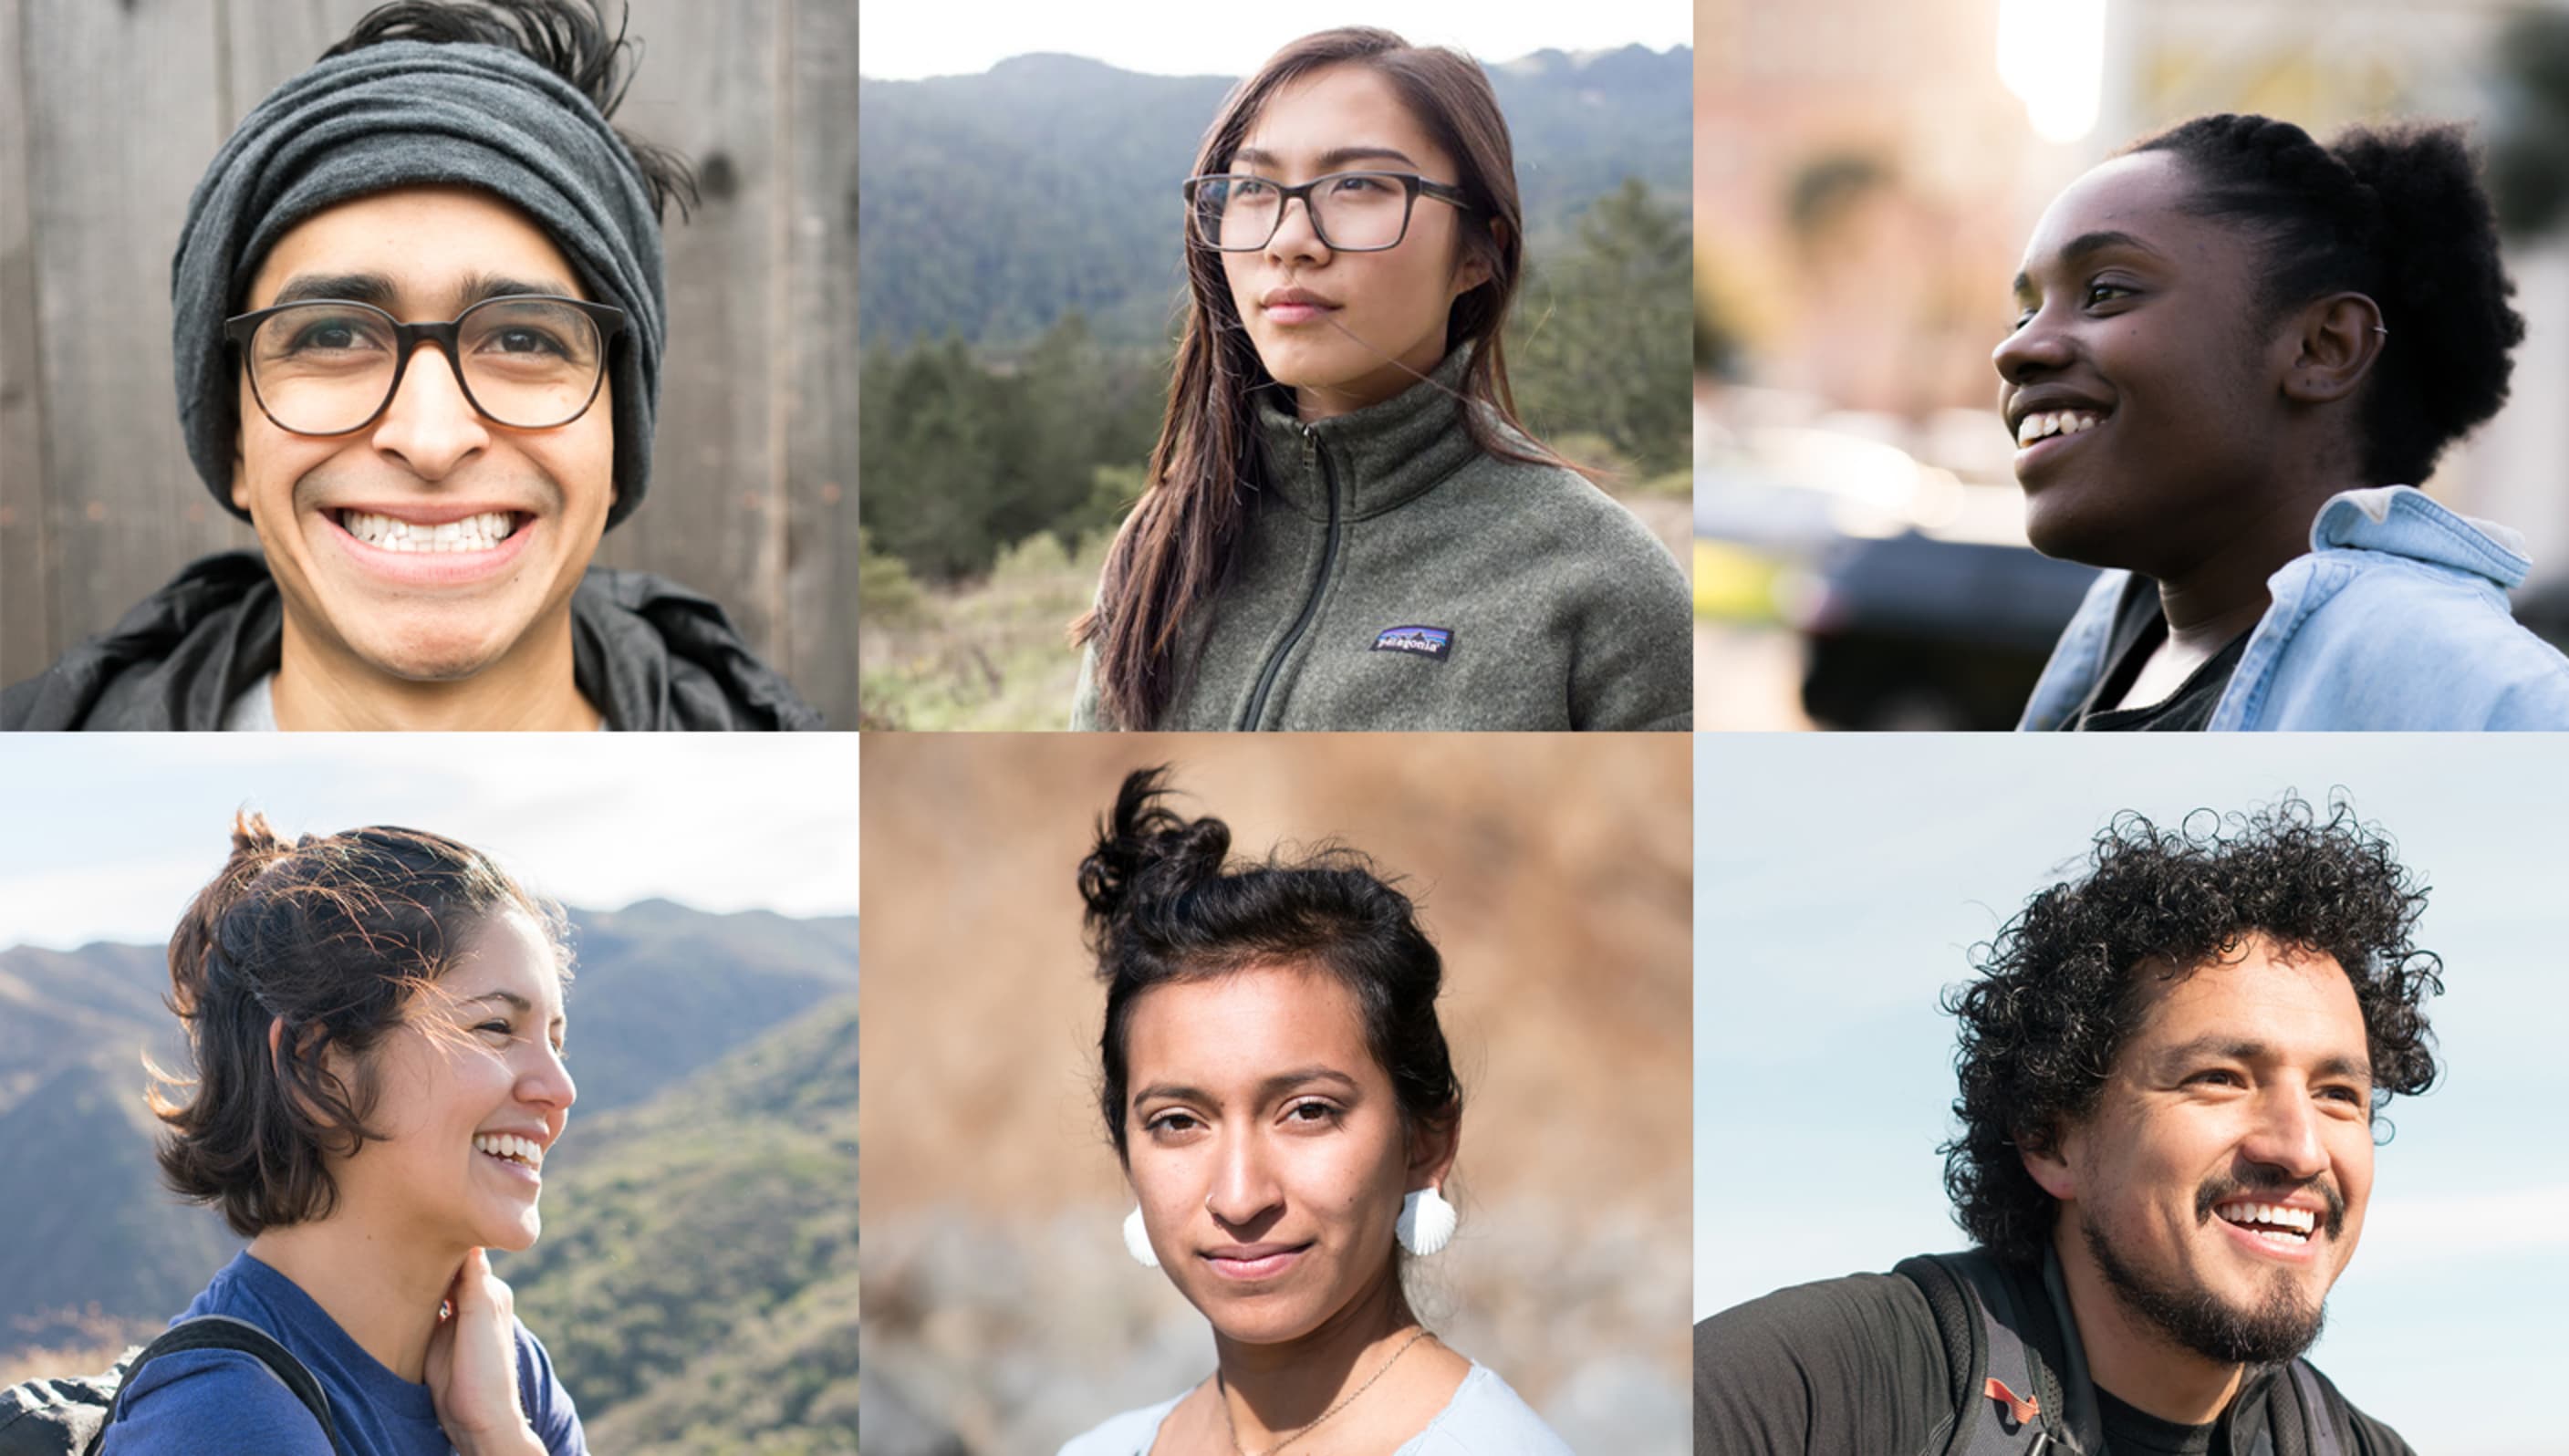 Meet BE: A New Media Collective Amplifying the Diversity of Our Parks, Trails and Campgrounds